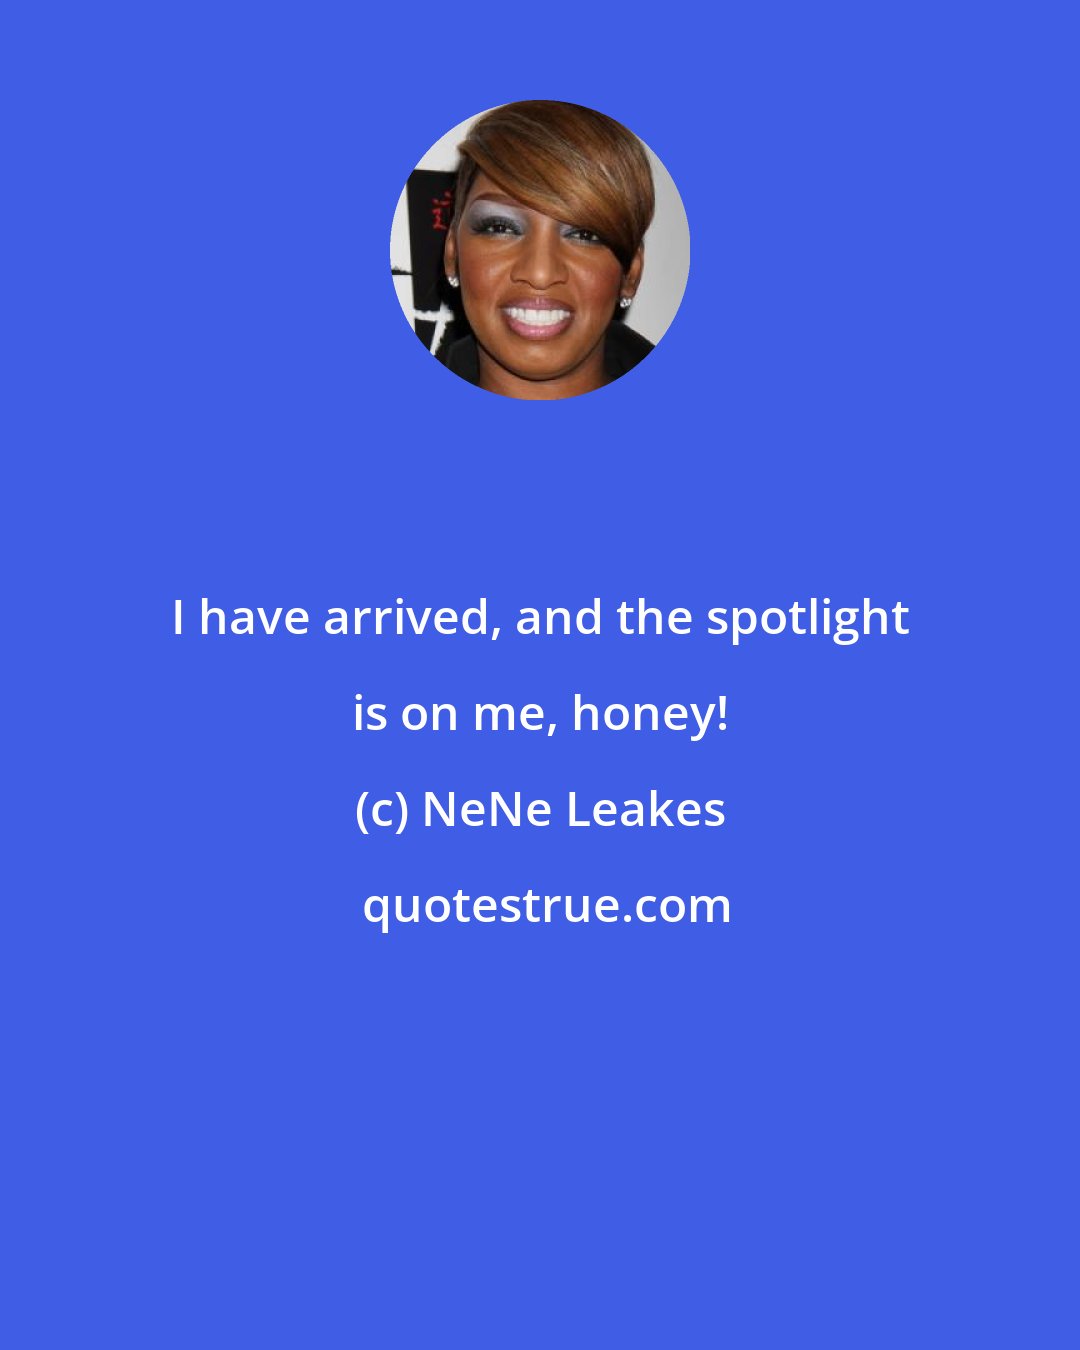 NeNe Leakes: I have arrived, and the spotlight is on me, honey!